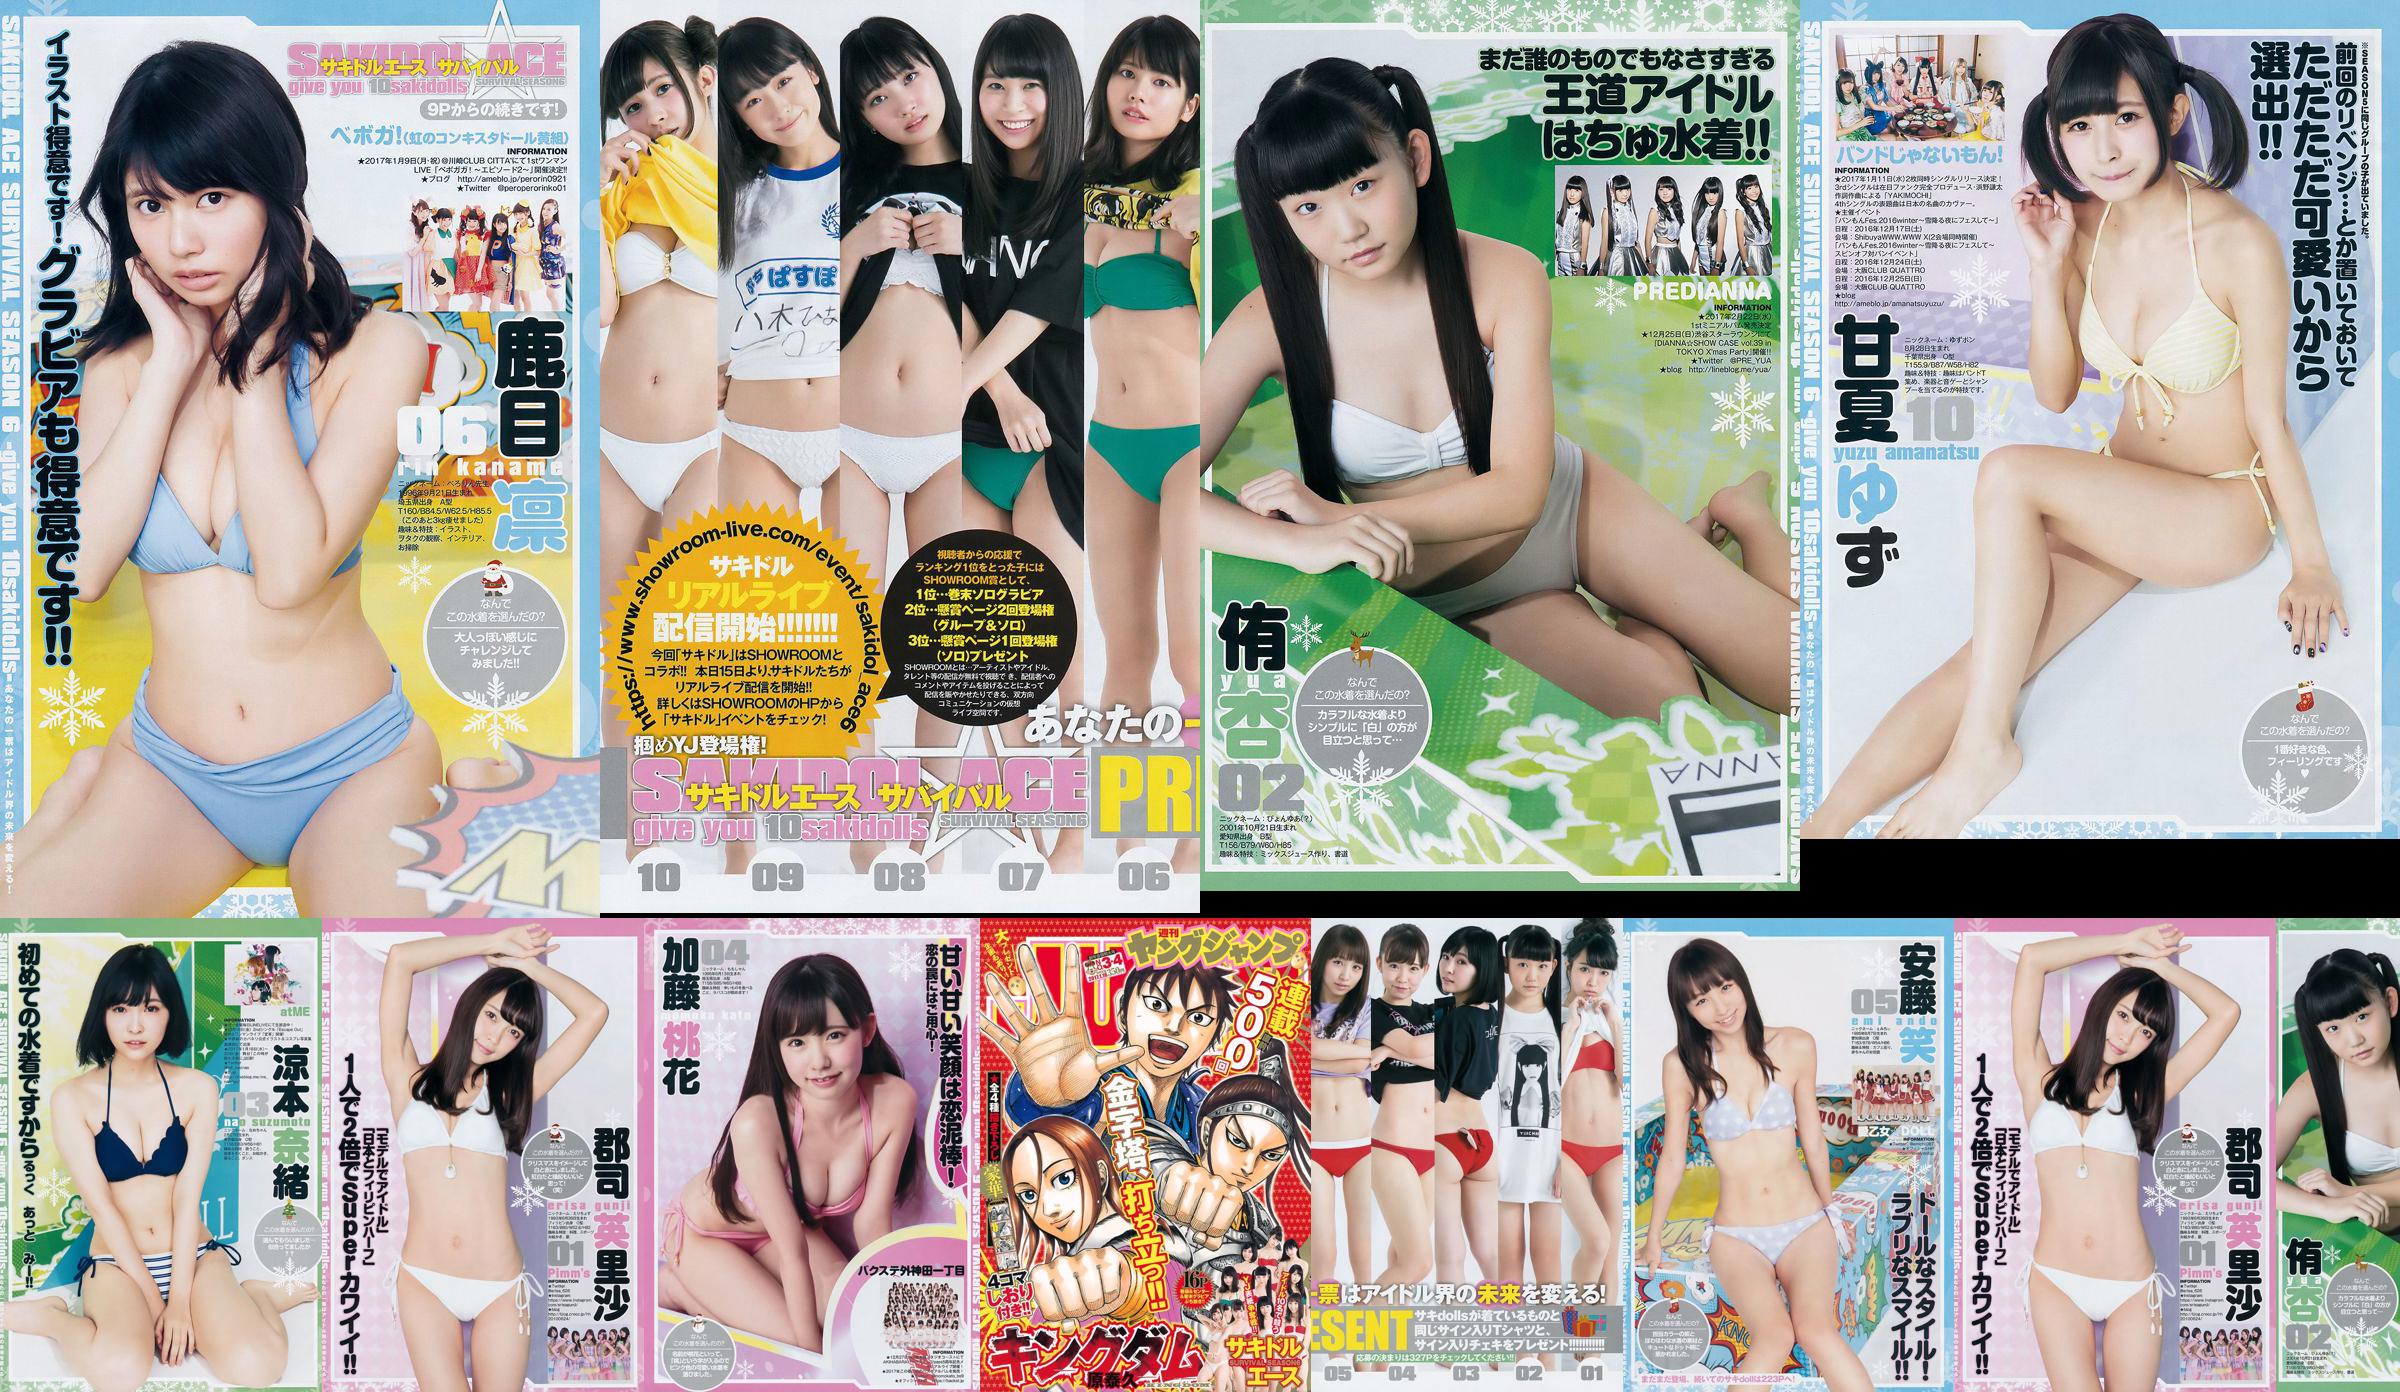 Sakidol Ace SURVIE SAISON6 《Donnez-vous 10sakidolls》 [Weekly Young Jump] 2017 No 03-04 Photo Magazine No.a4bbd4 Page 1